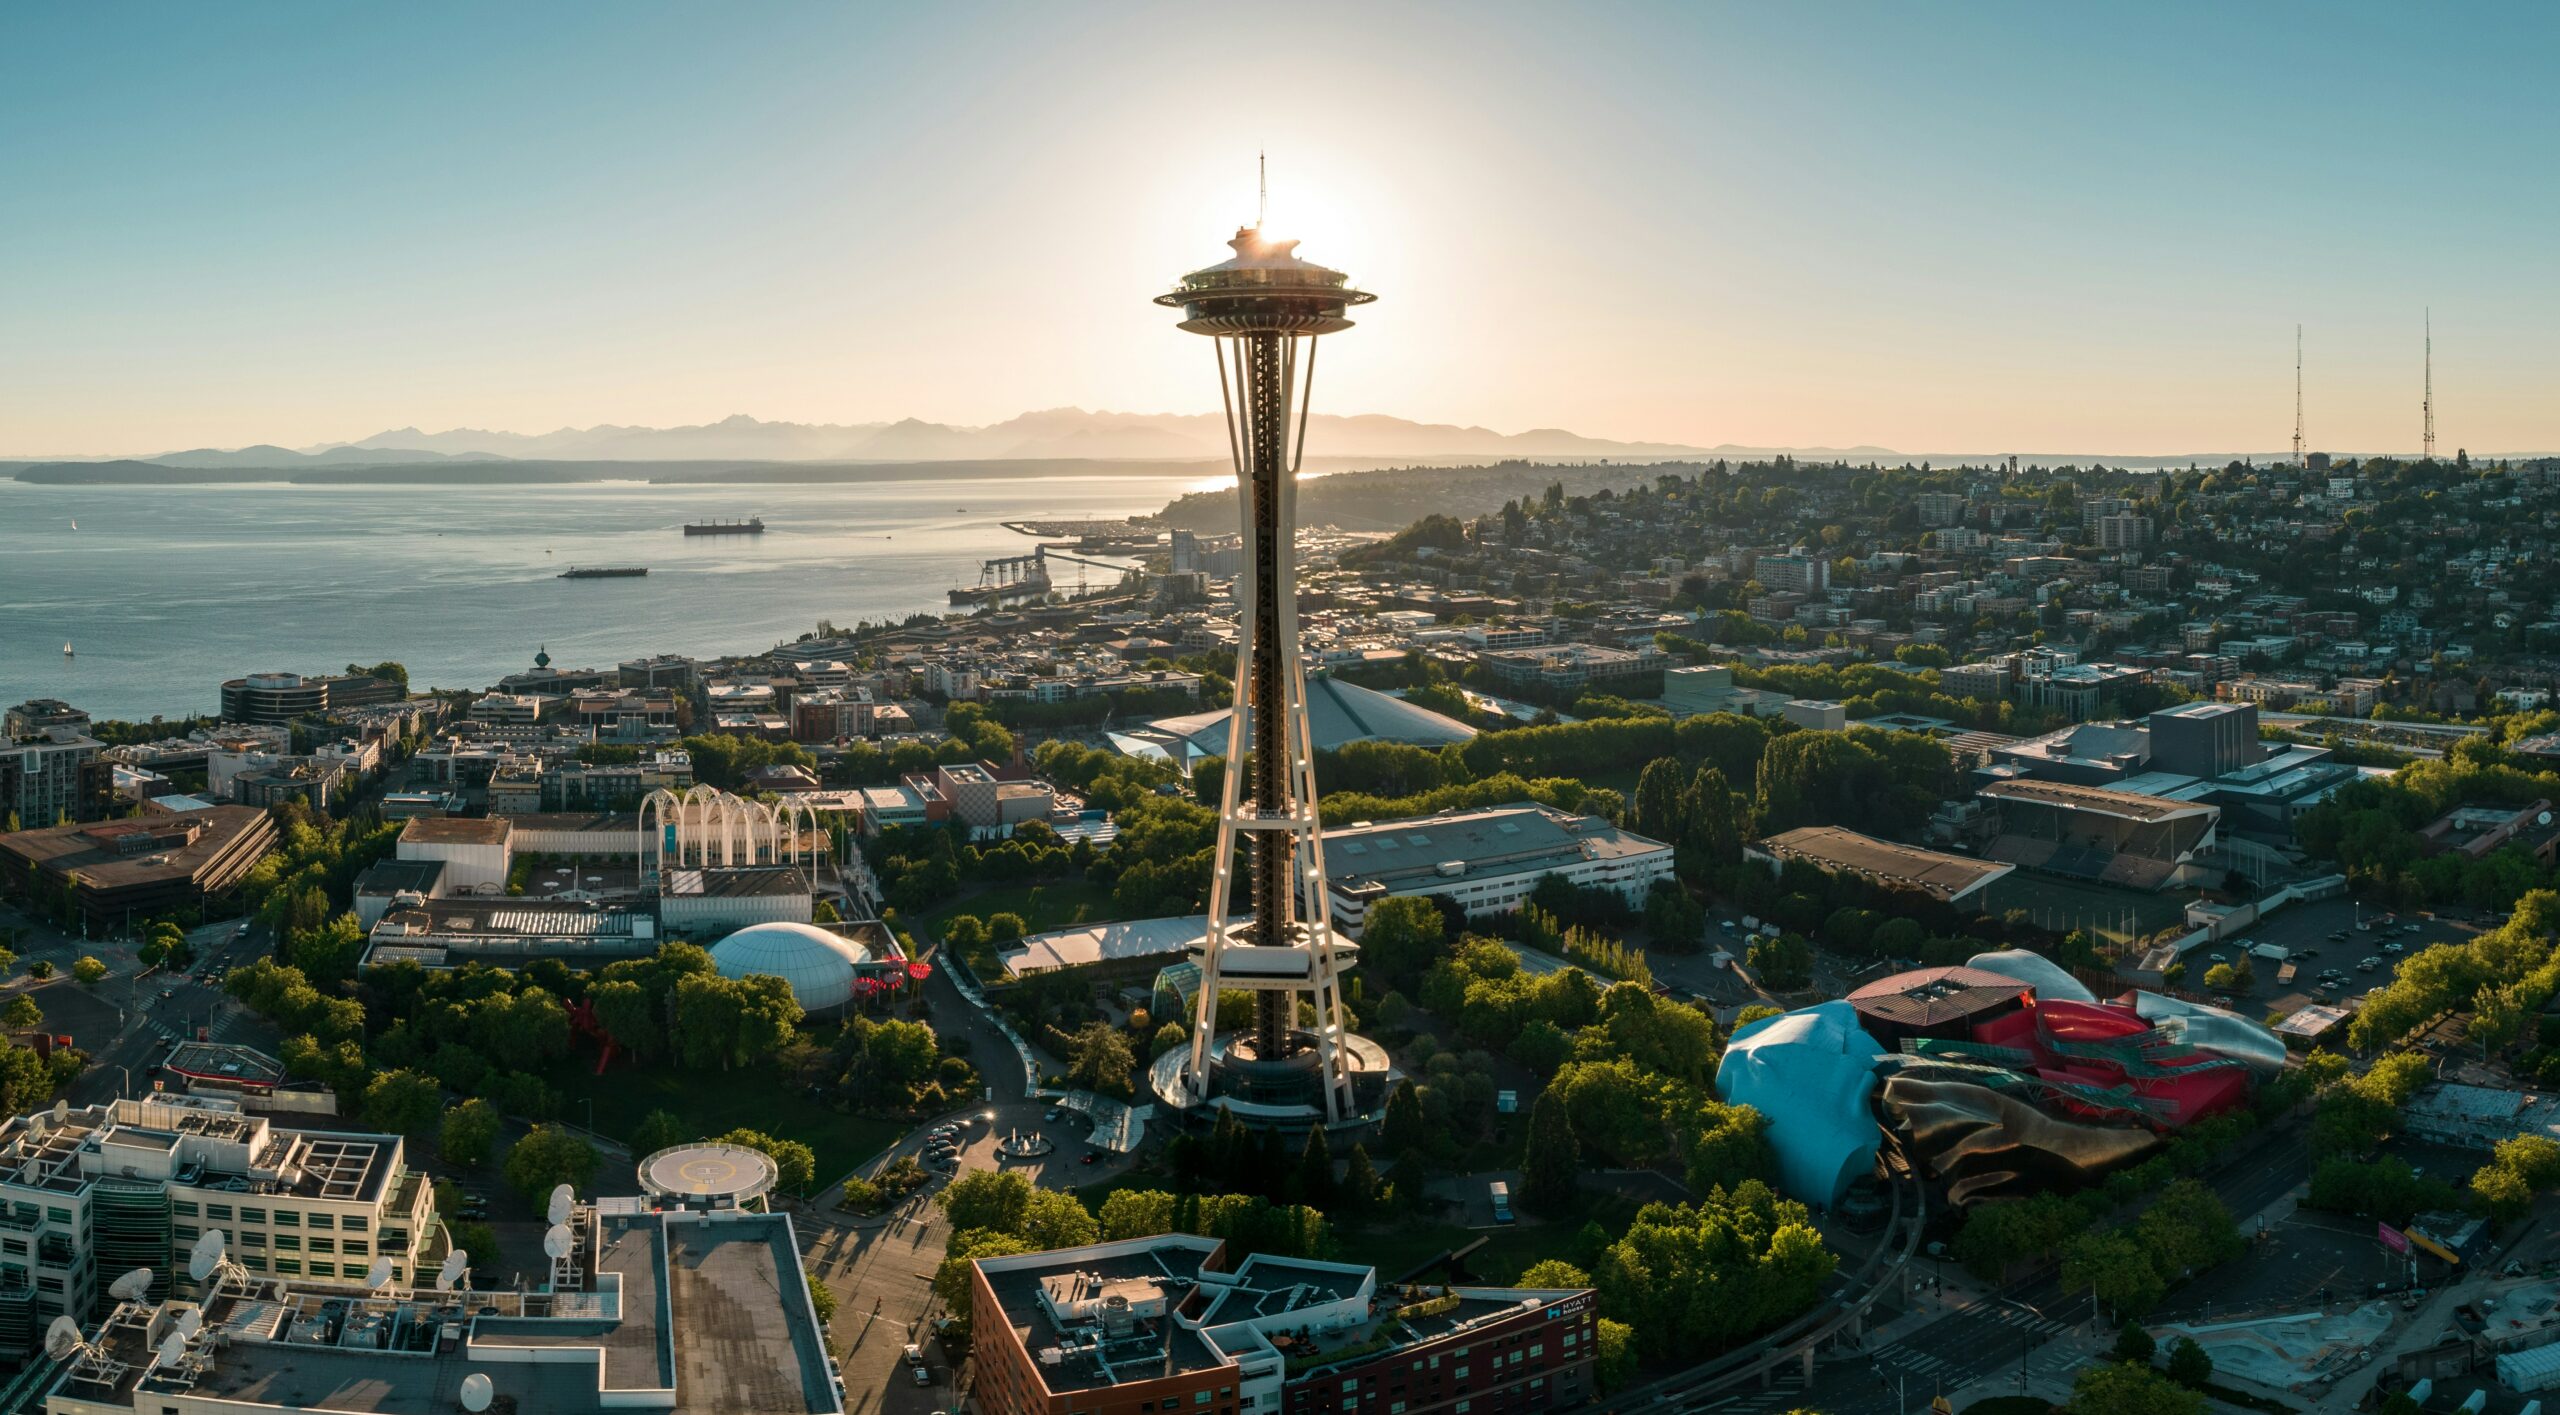 The Urbanist: “Boost Seattle’s Growth Plan to Solve the Housing Crisis”